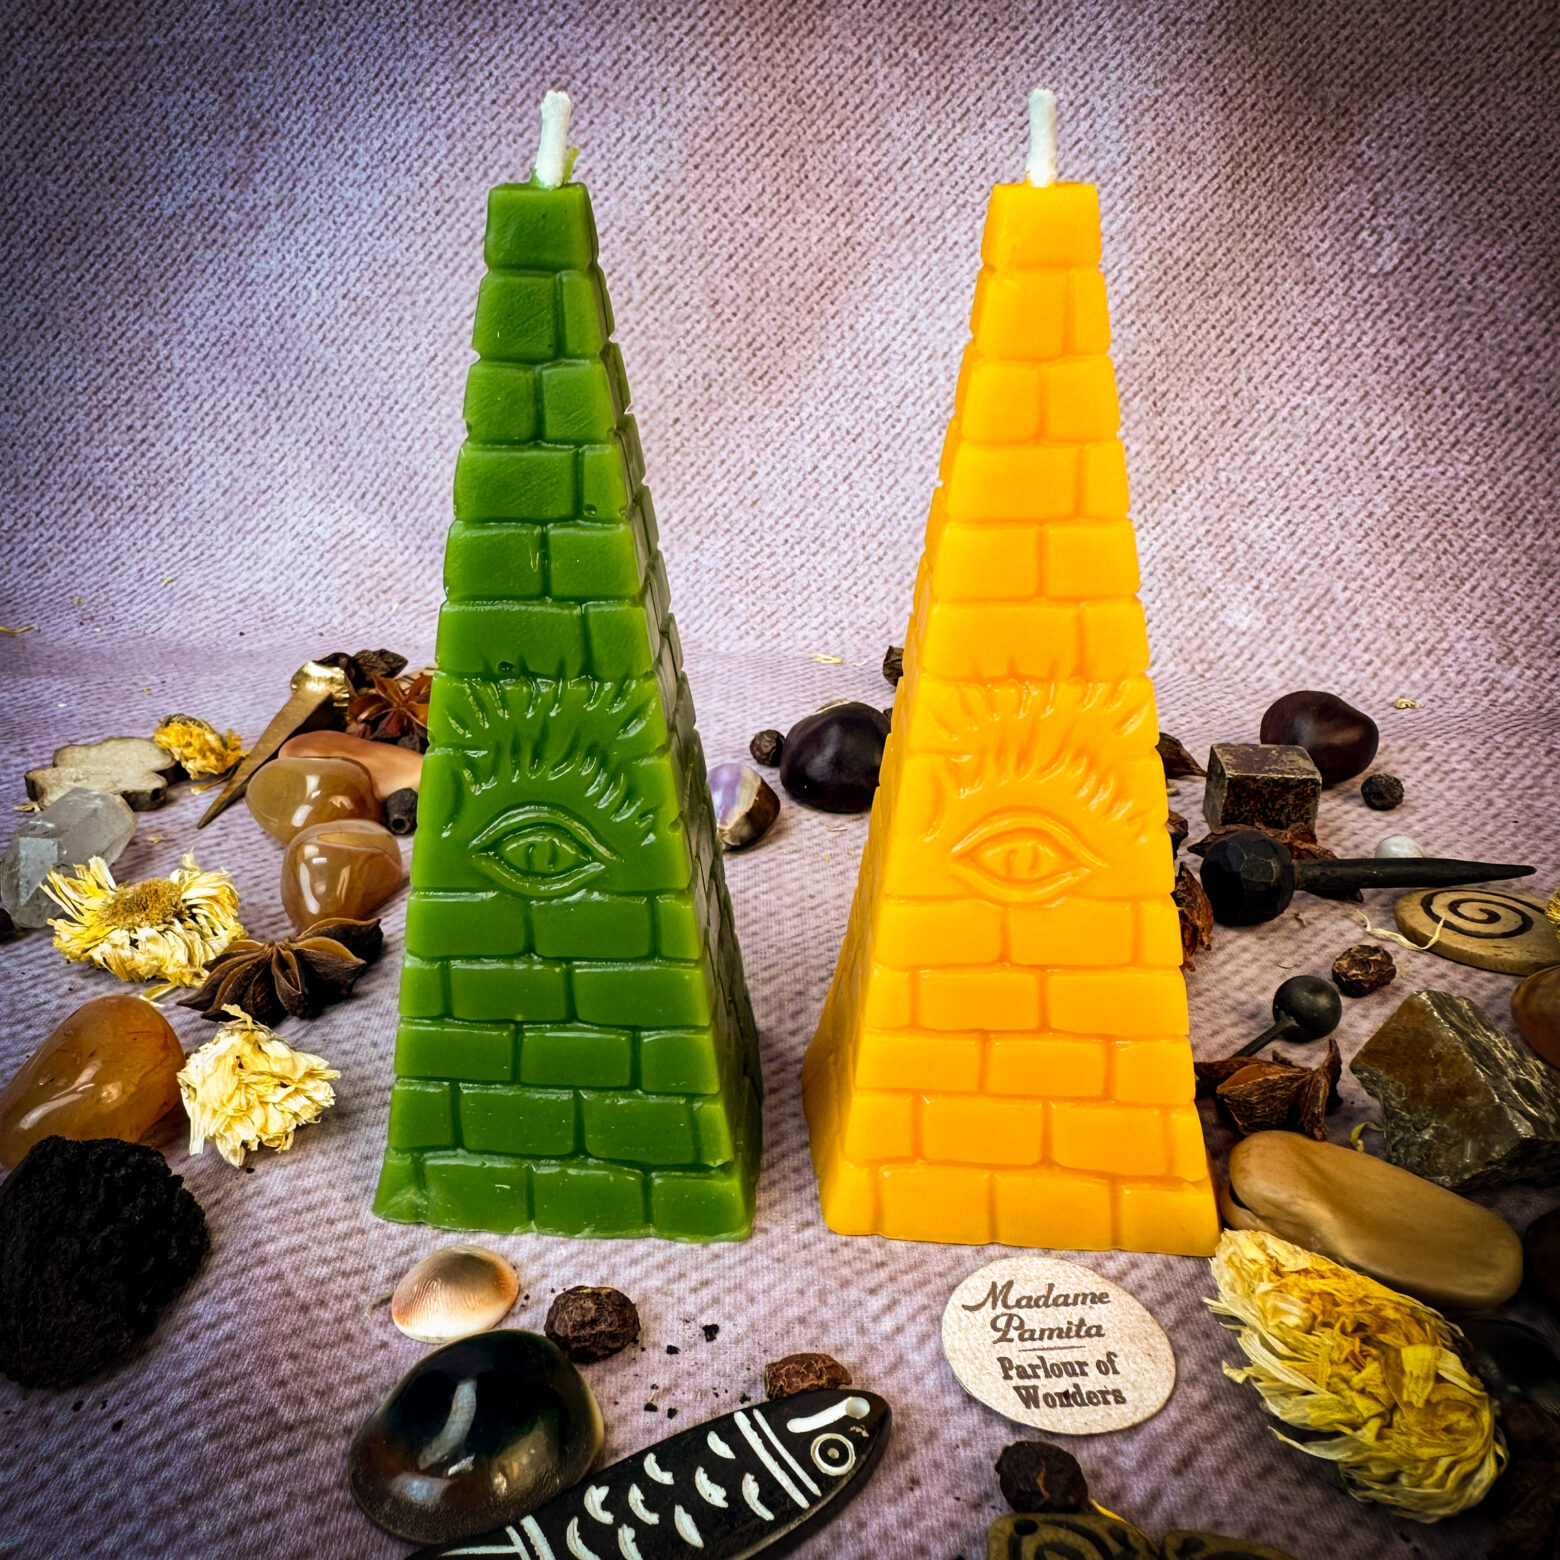 COVEN EXCLUSIVE: Beeswax All Seeing Eye Money Spell Candle